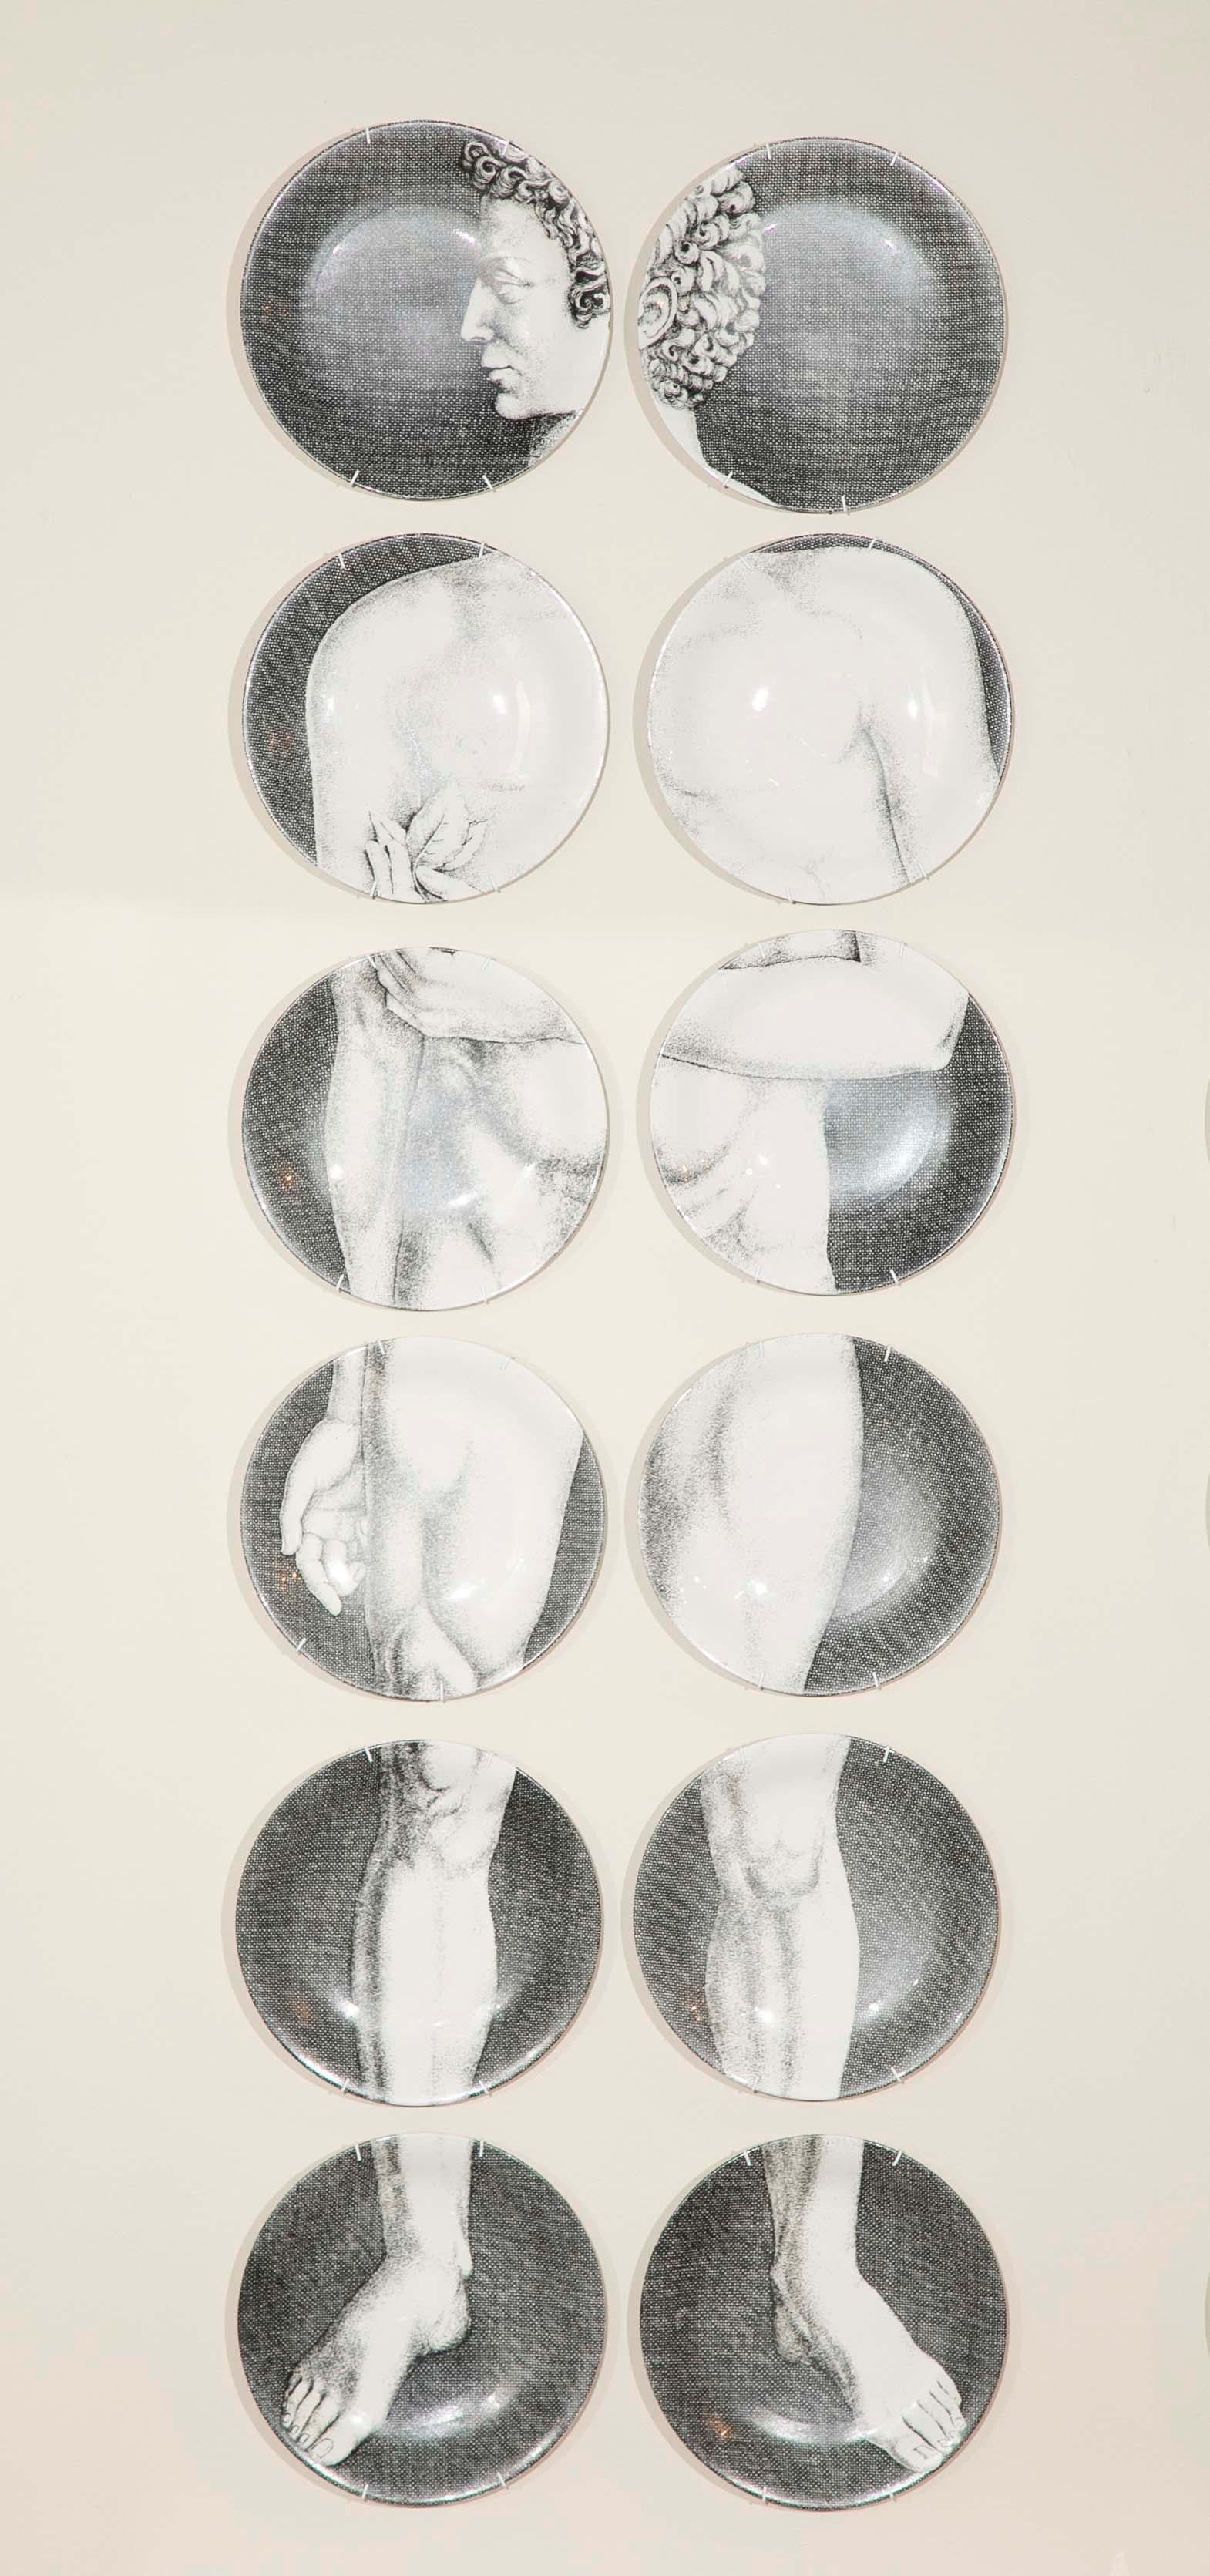 fornasetti adam and eve plates for sale